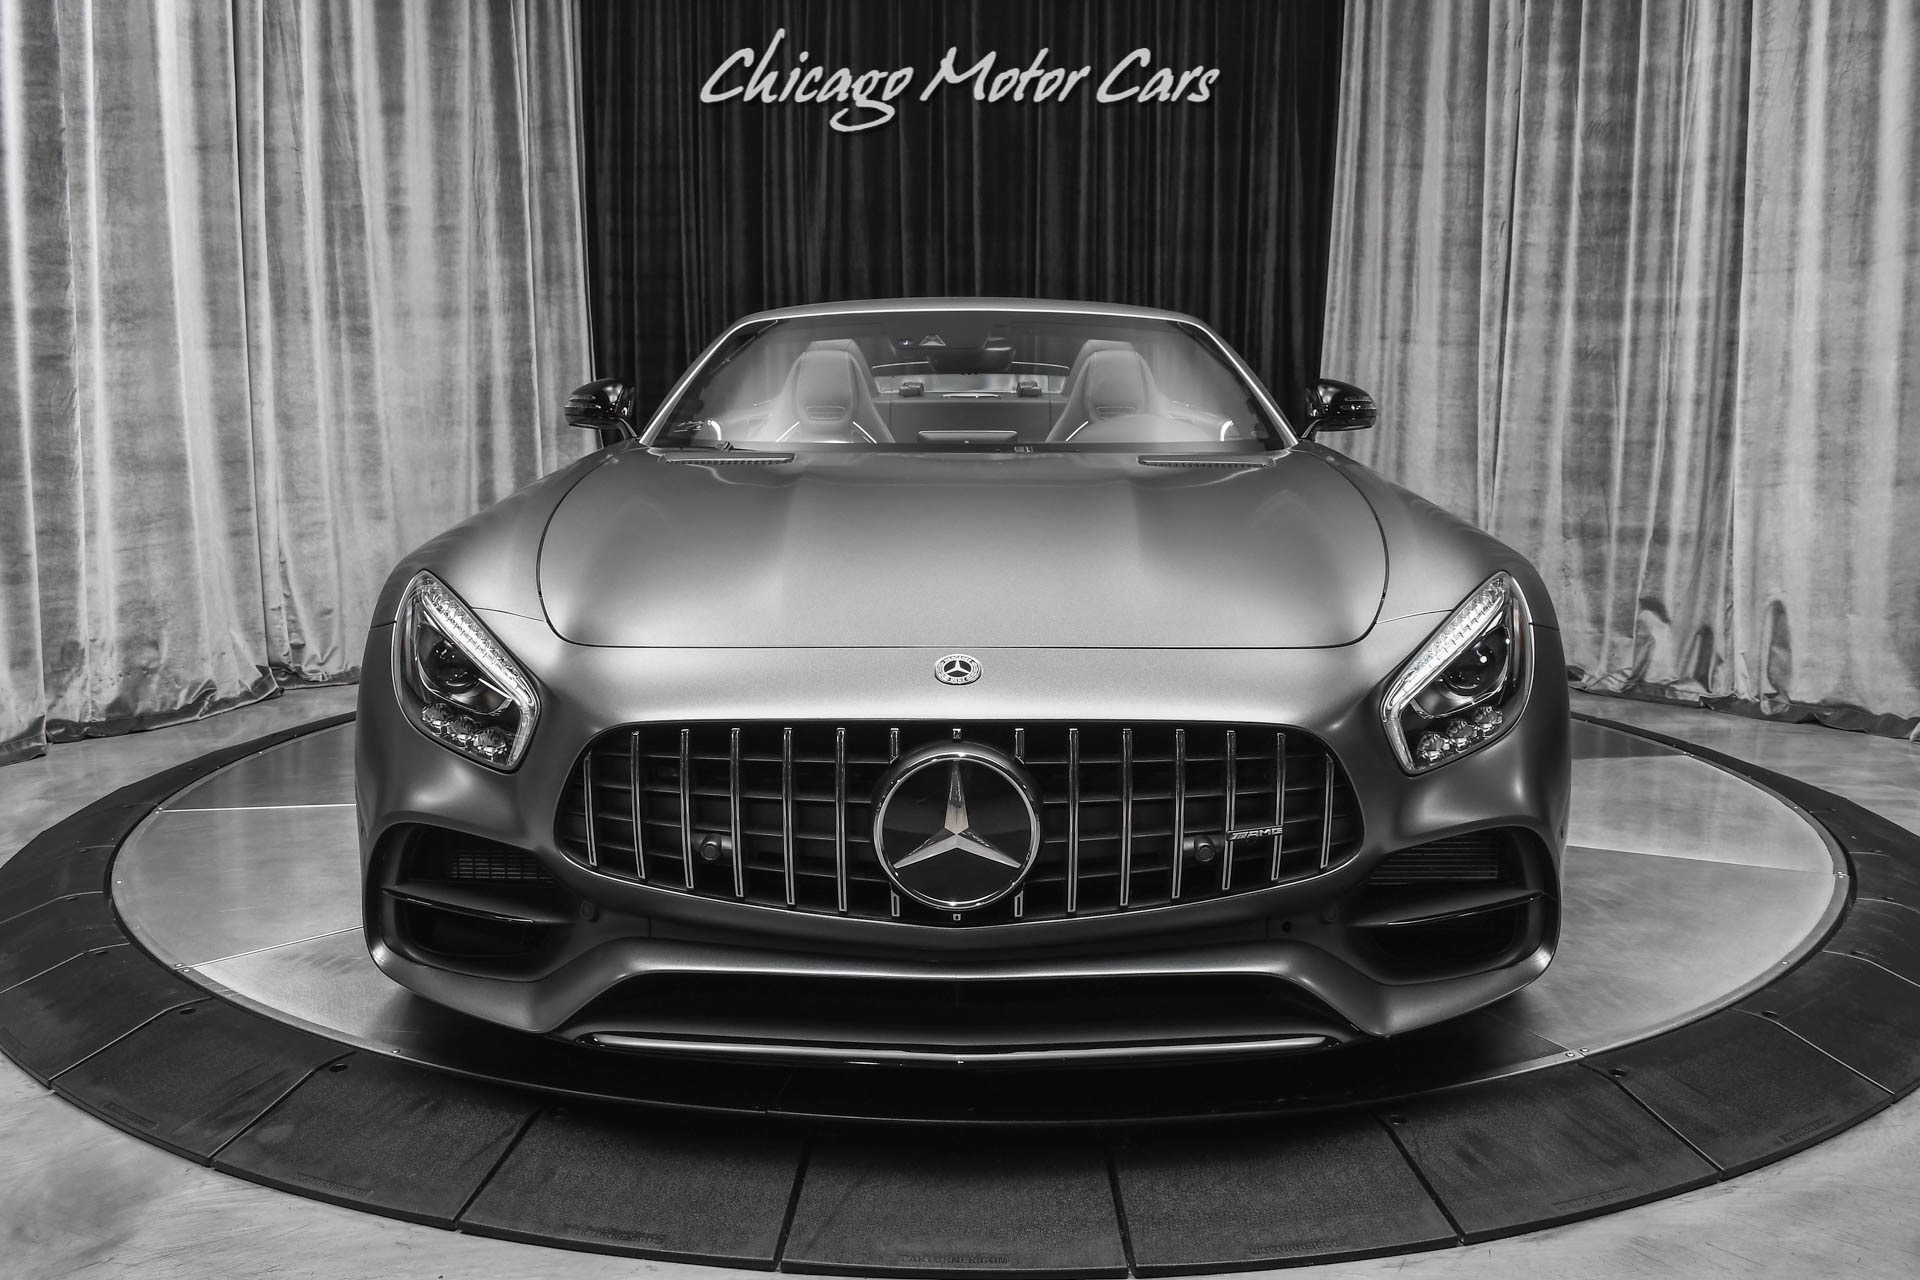 Used-2018-Mercedes-Benz-AMG-GT-ROADSTER-LOW-MILES-Hot-Spec-Exclusive-Interior-Pack-LOADED